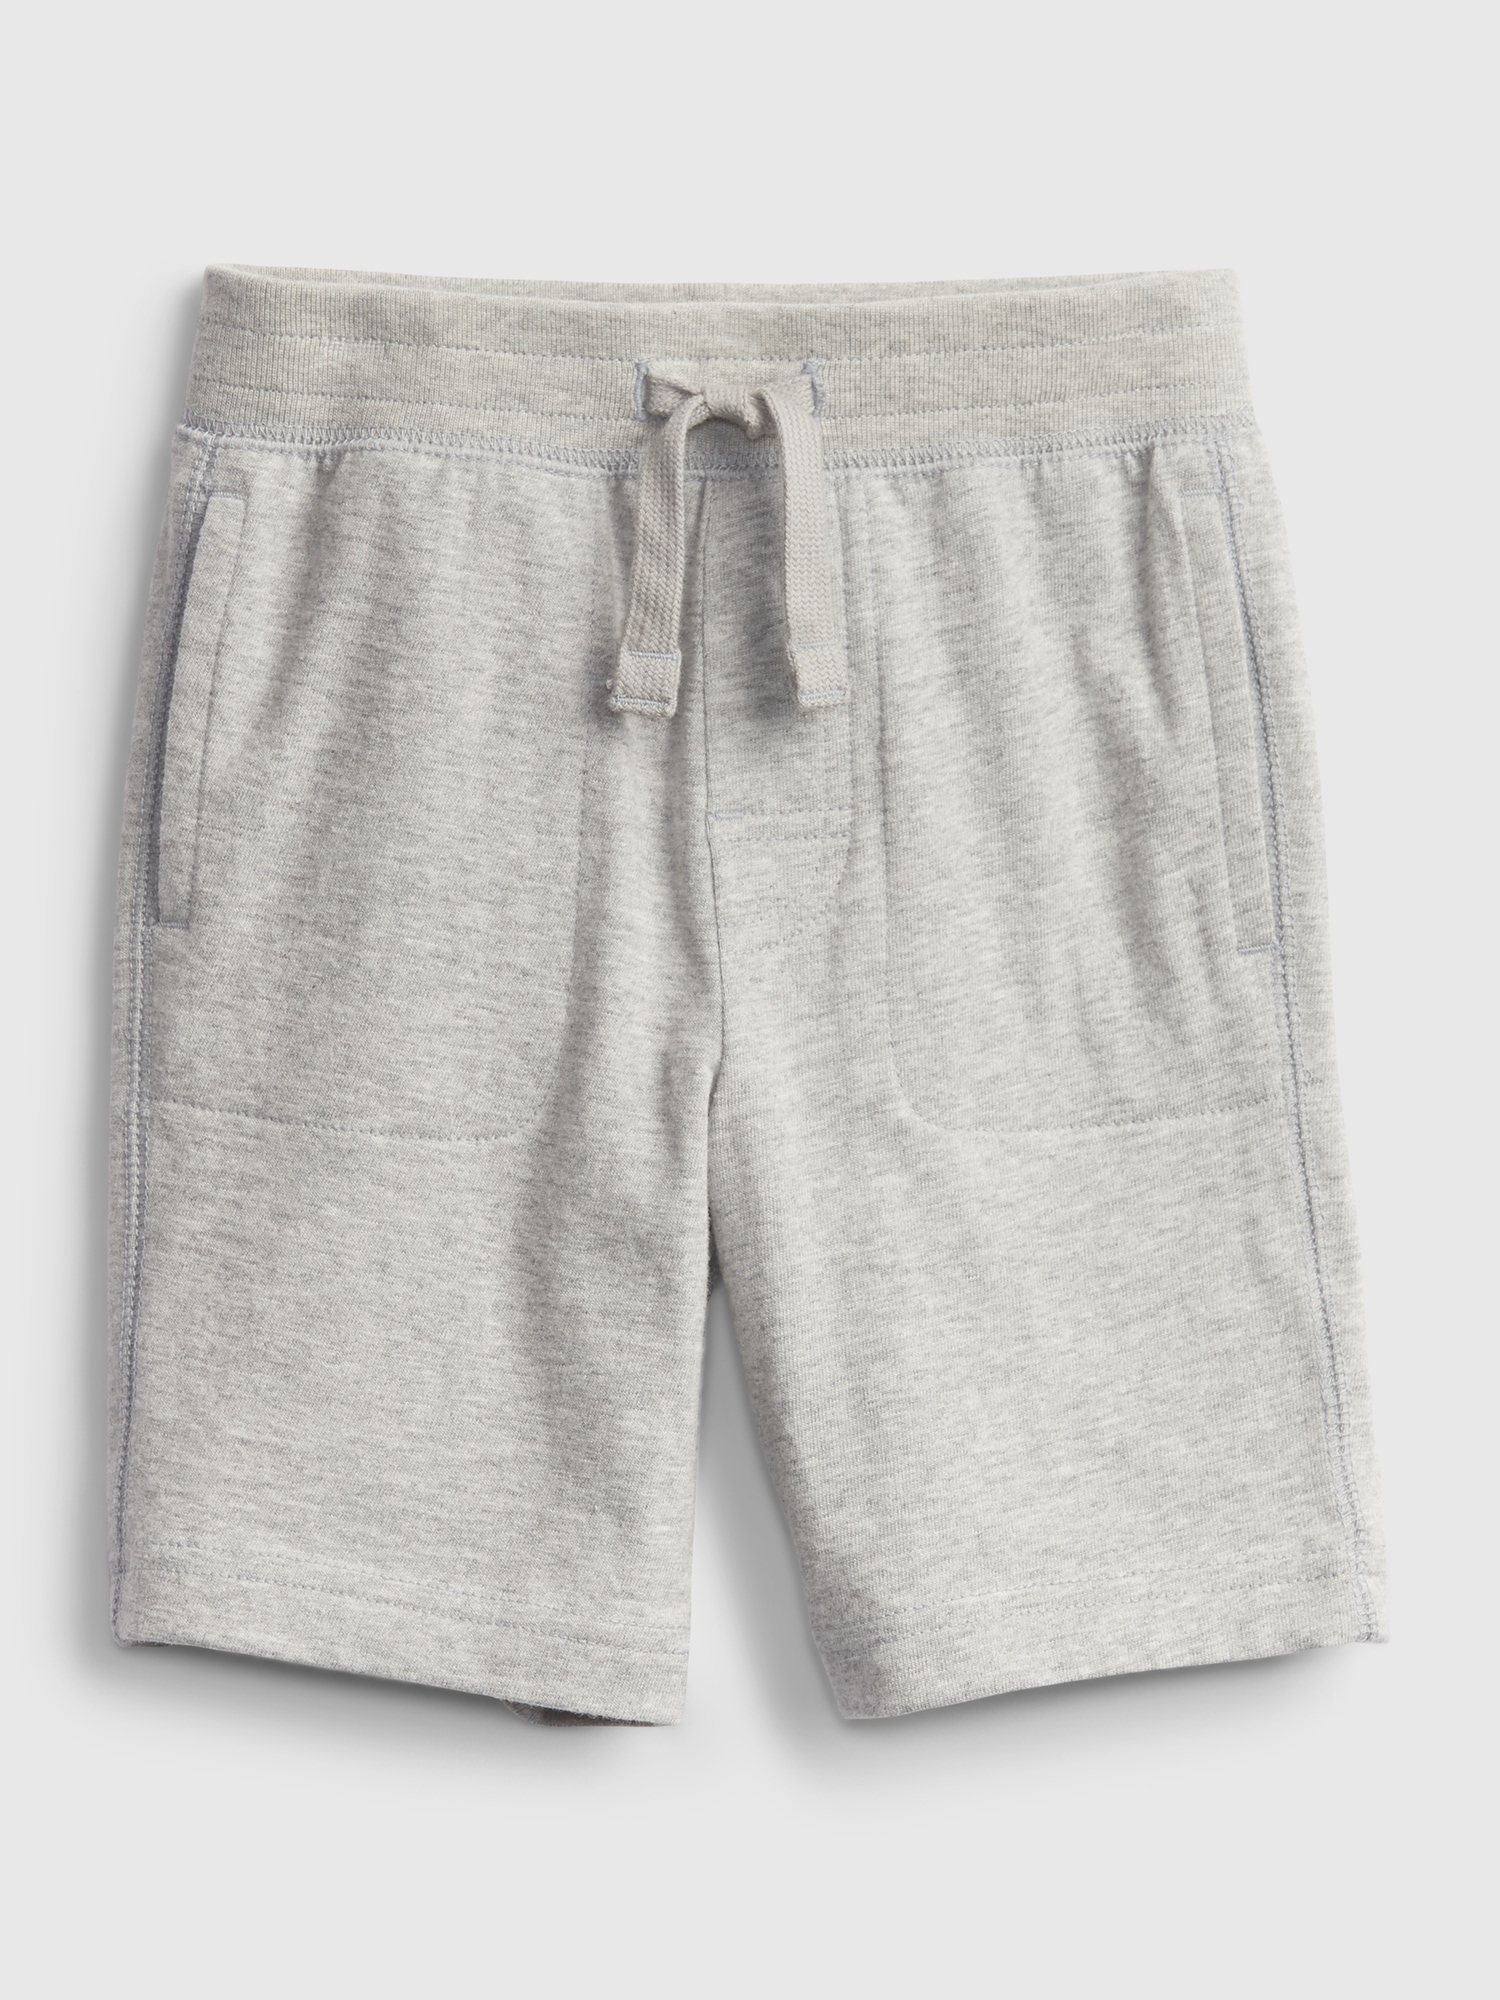 Toddler Organic Cotton Mix and Match Pull-On Shorts | Gap